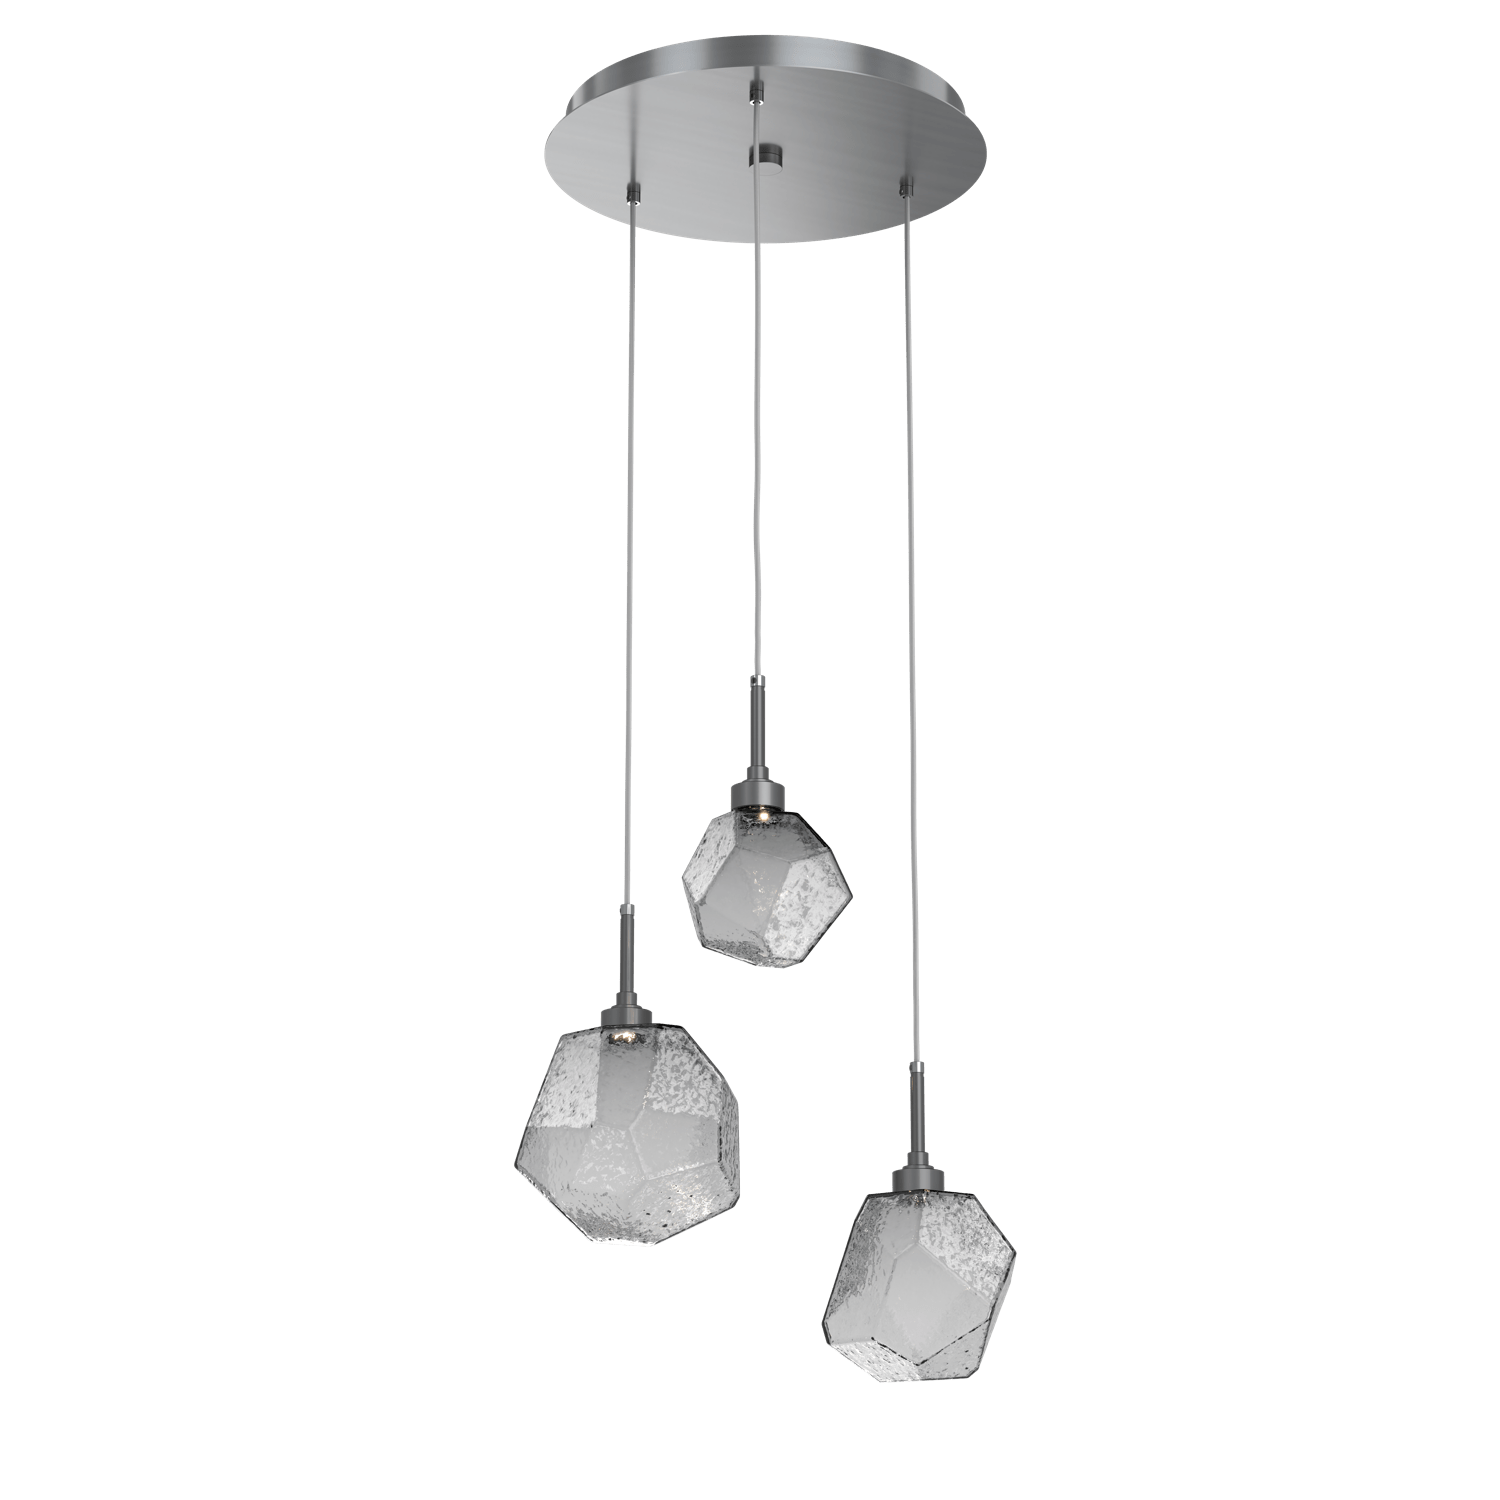 CHB0039-03-GM-S-Hammerton-Studio-Gem-3-light-round-pendant-chandelier-with-gunmetal-finish-and-smoke-blown-glass-shades-and-LED-lamping